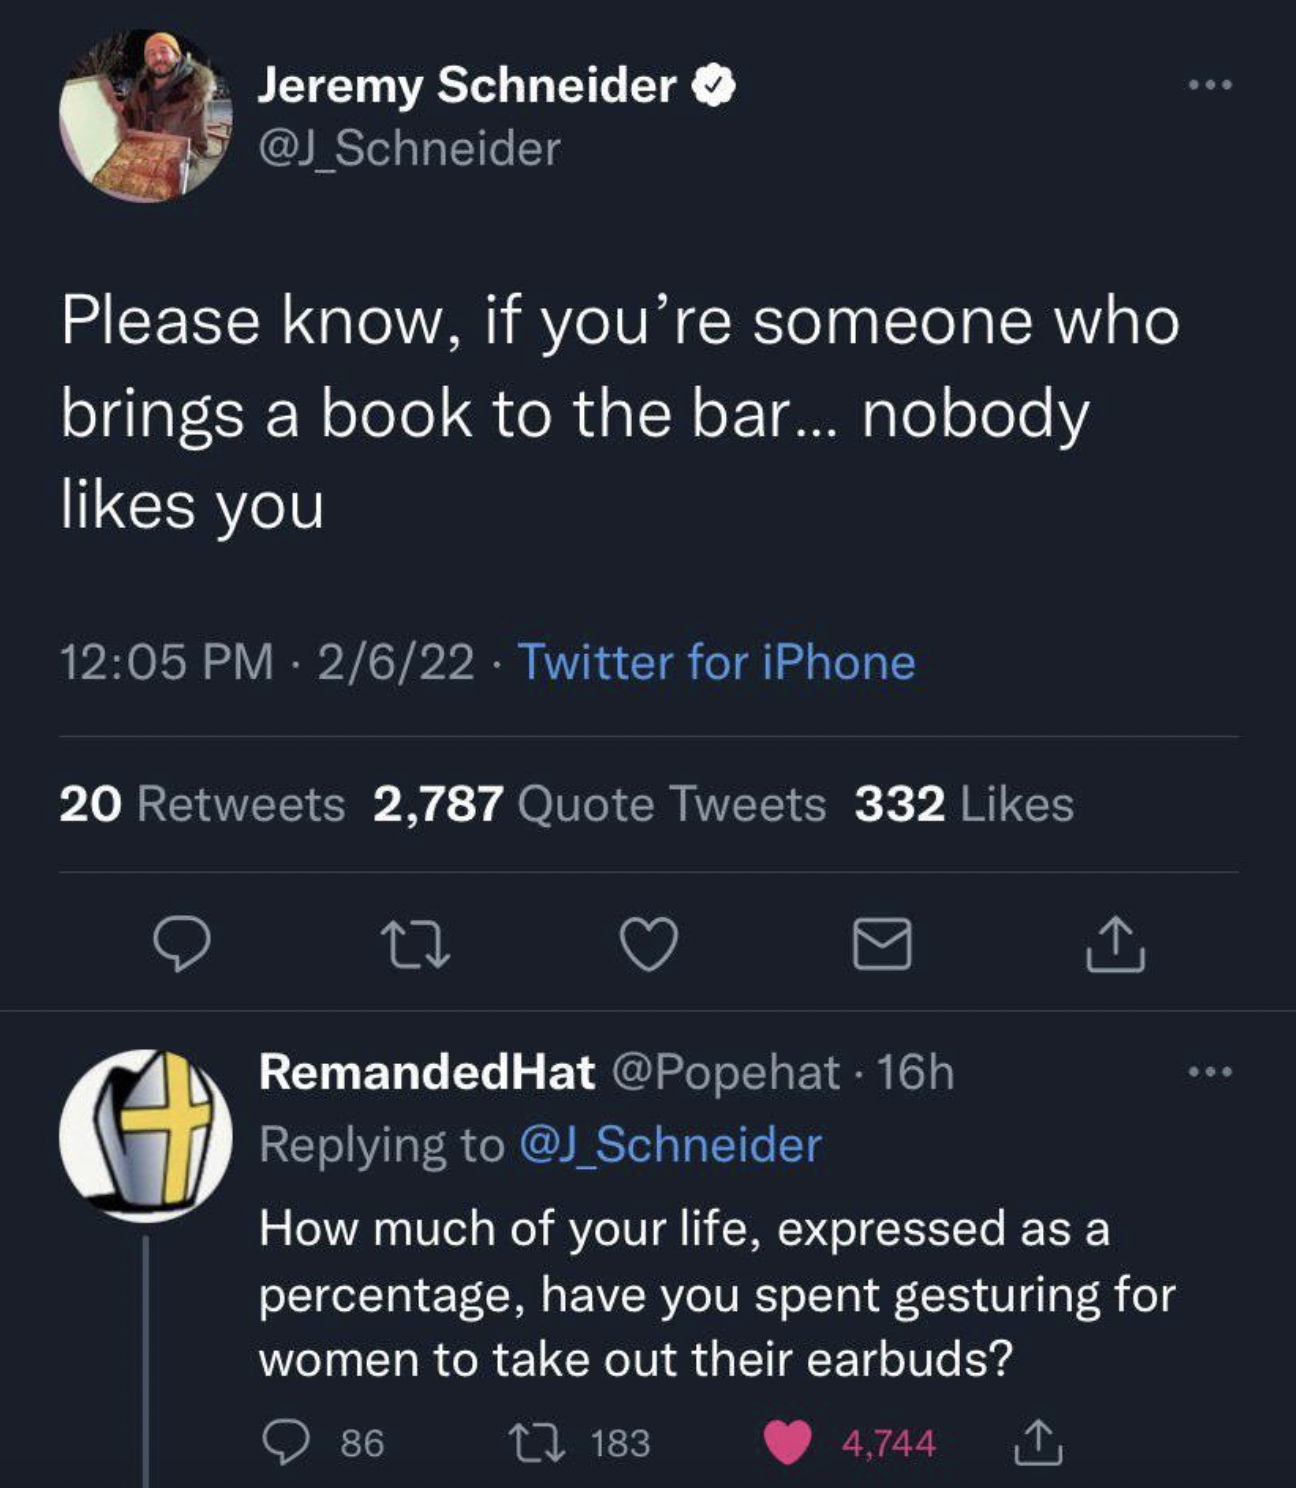 screenshot - Jeremy Schneider Please know, if you're someone who brings a book to the bar... nobody you 2622 Twitter for iPhone 20 2,787 Quote Tweets 332 RemandedHat 16h How much of your life, expressed as a percentage, have you spent gesturing for women 